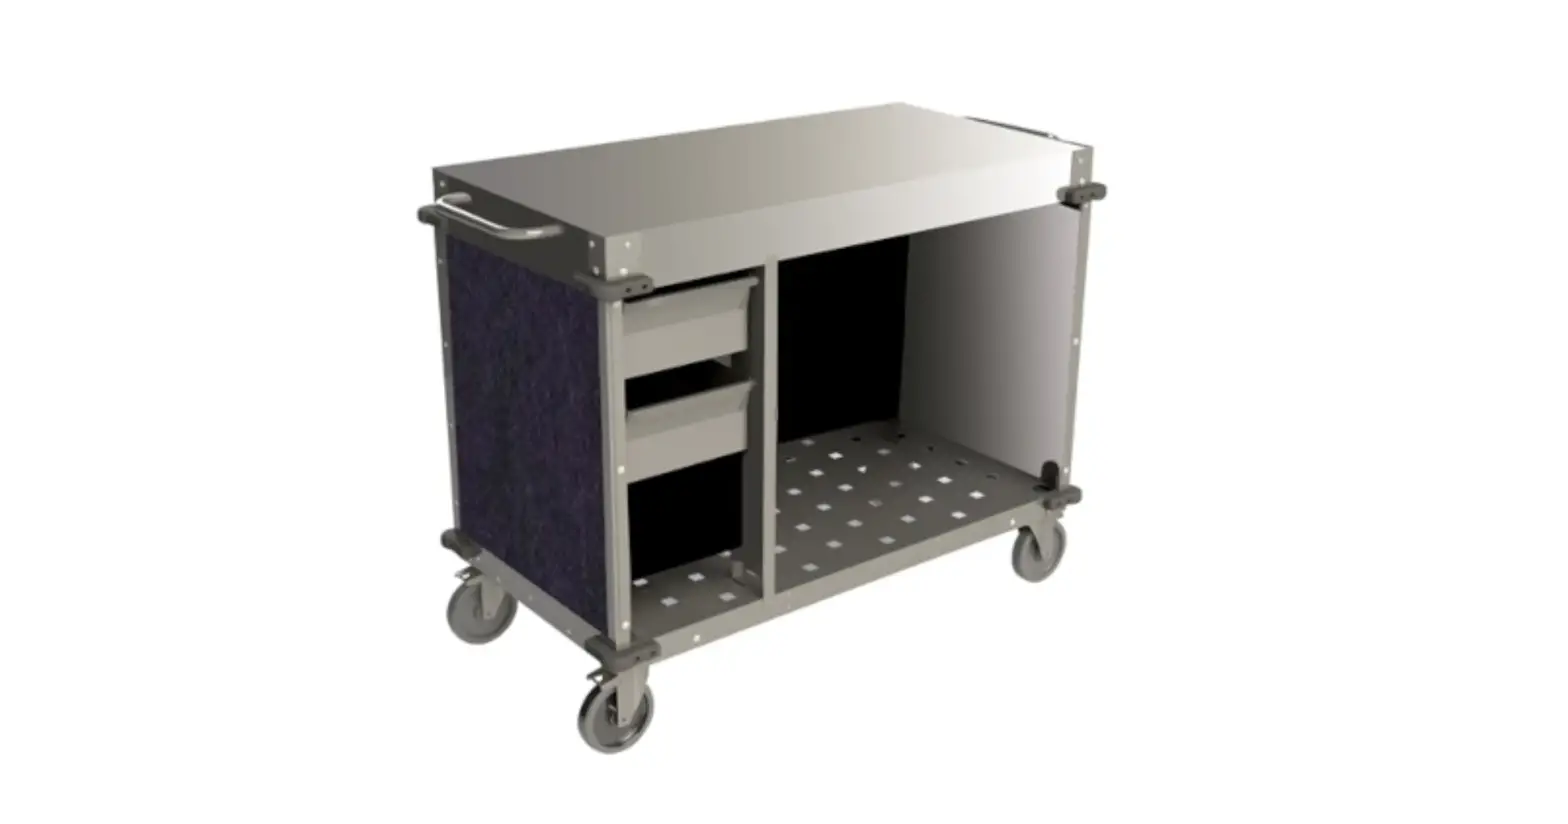 Cadco CBC-PHRX-L4 Stainless Steel Demo Sampling Cart Owner’s Manual